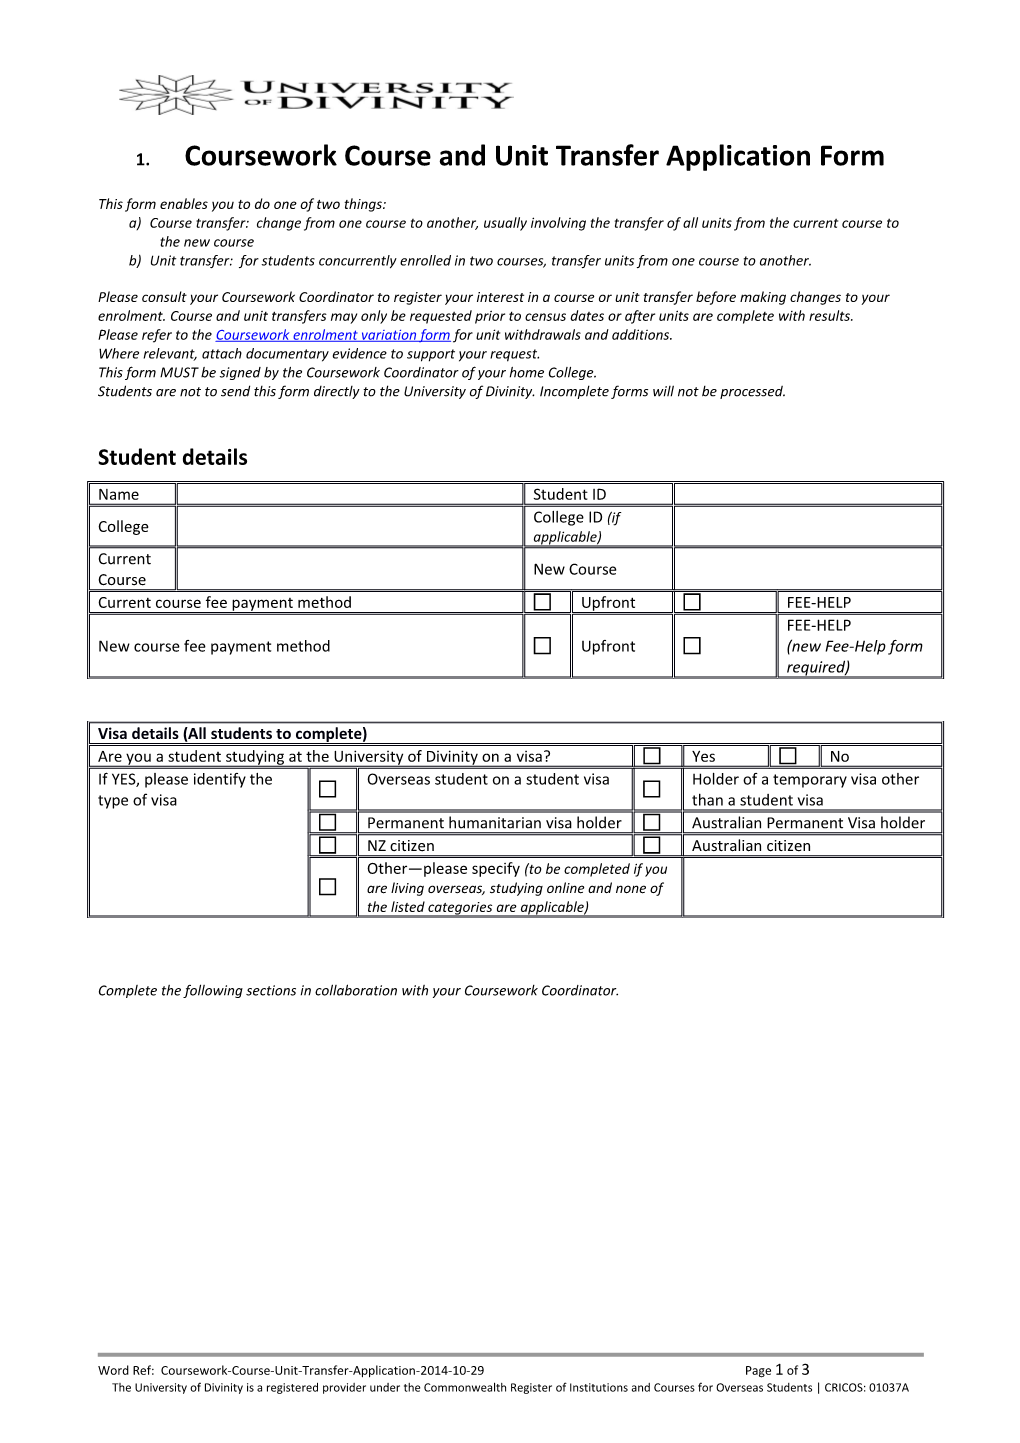 Coursework Course and Unit Transfer Application Form